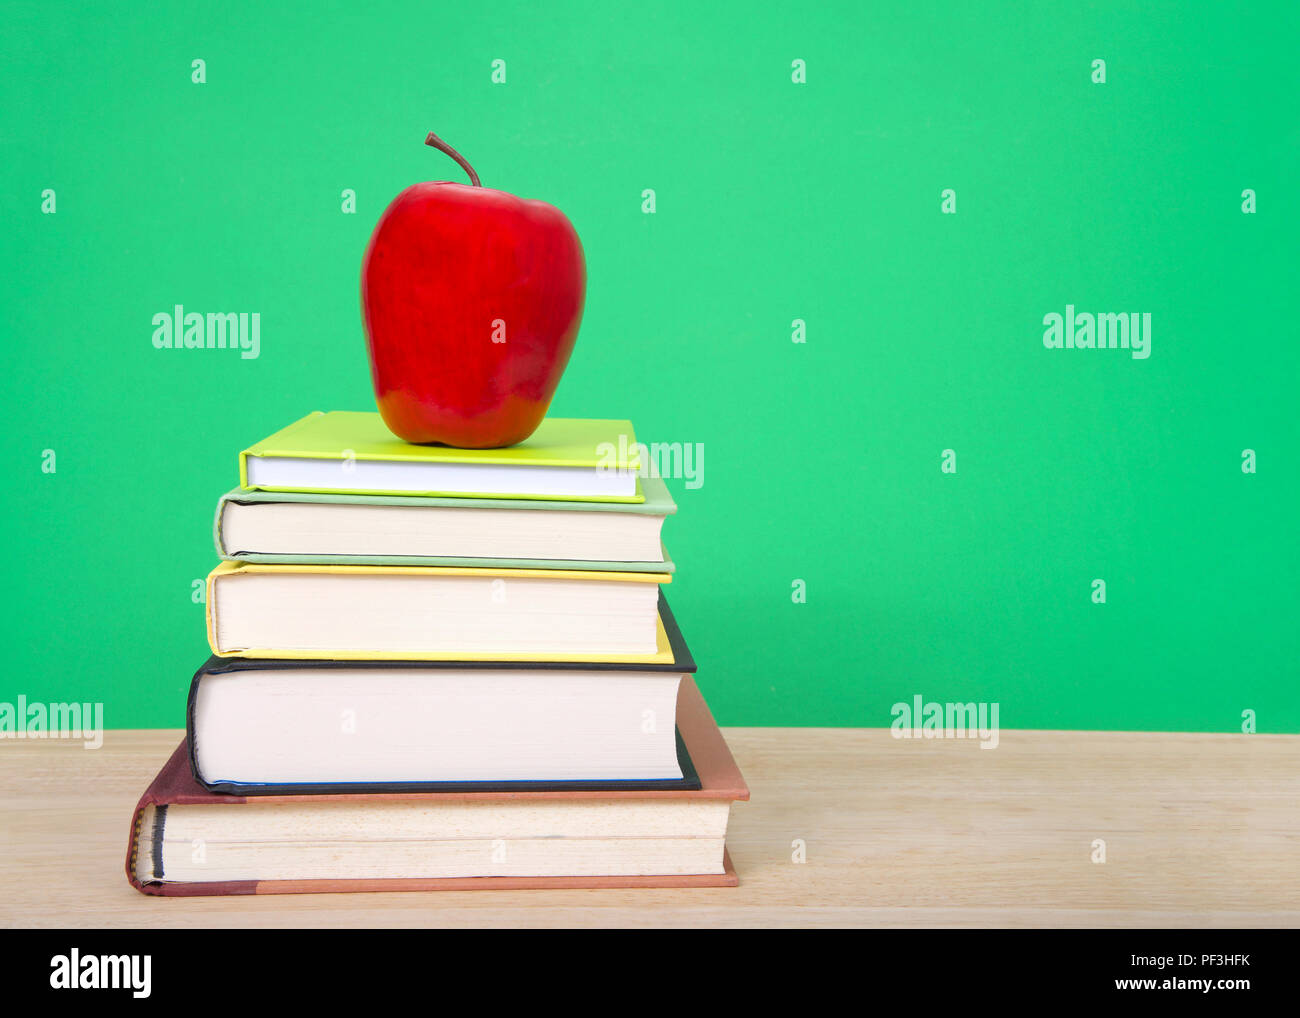 Hard bound books with various colored covers stacked on light wood table with red apple on top, dark green background similar to old fashioned chalk b Stock Photo